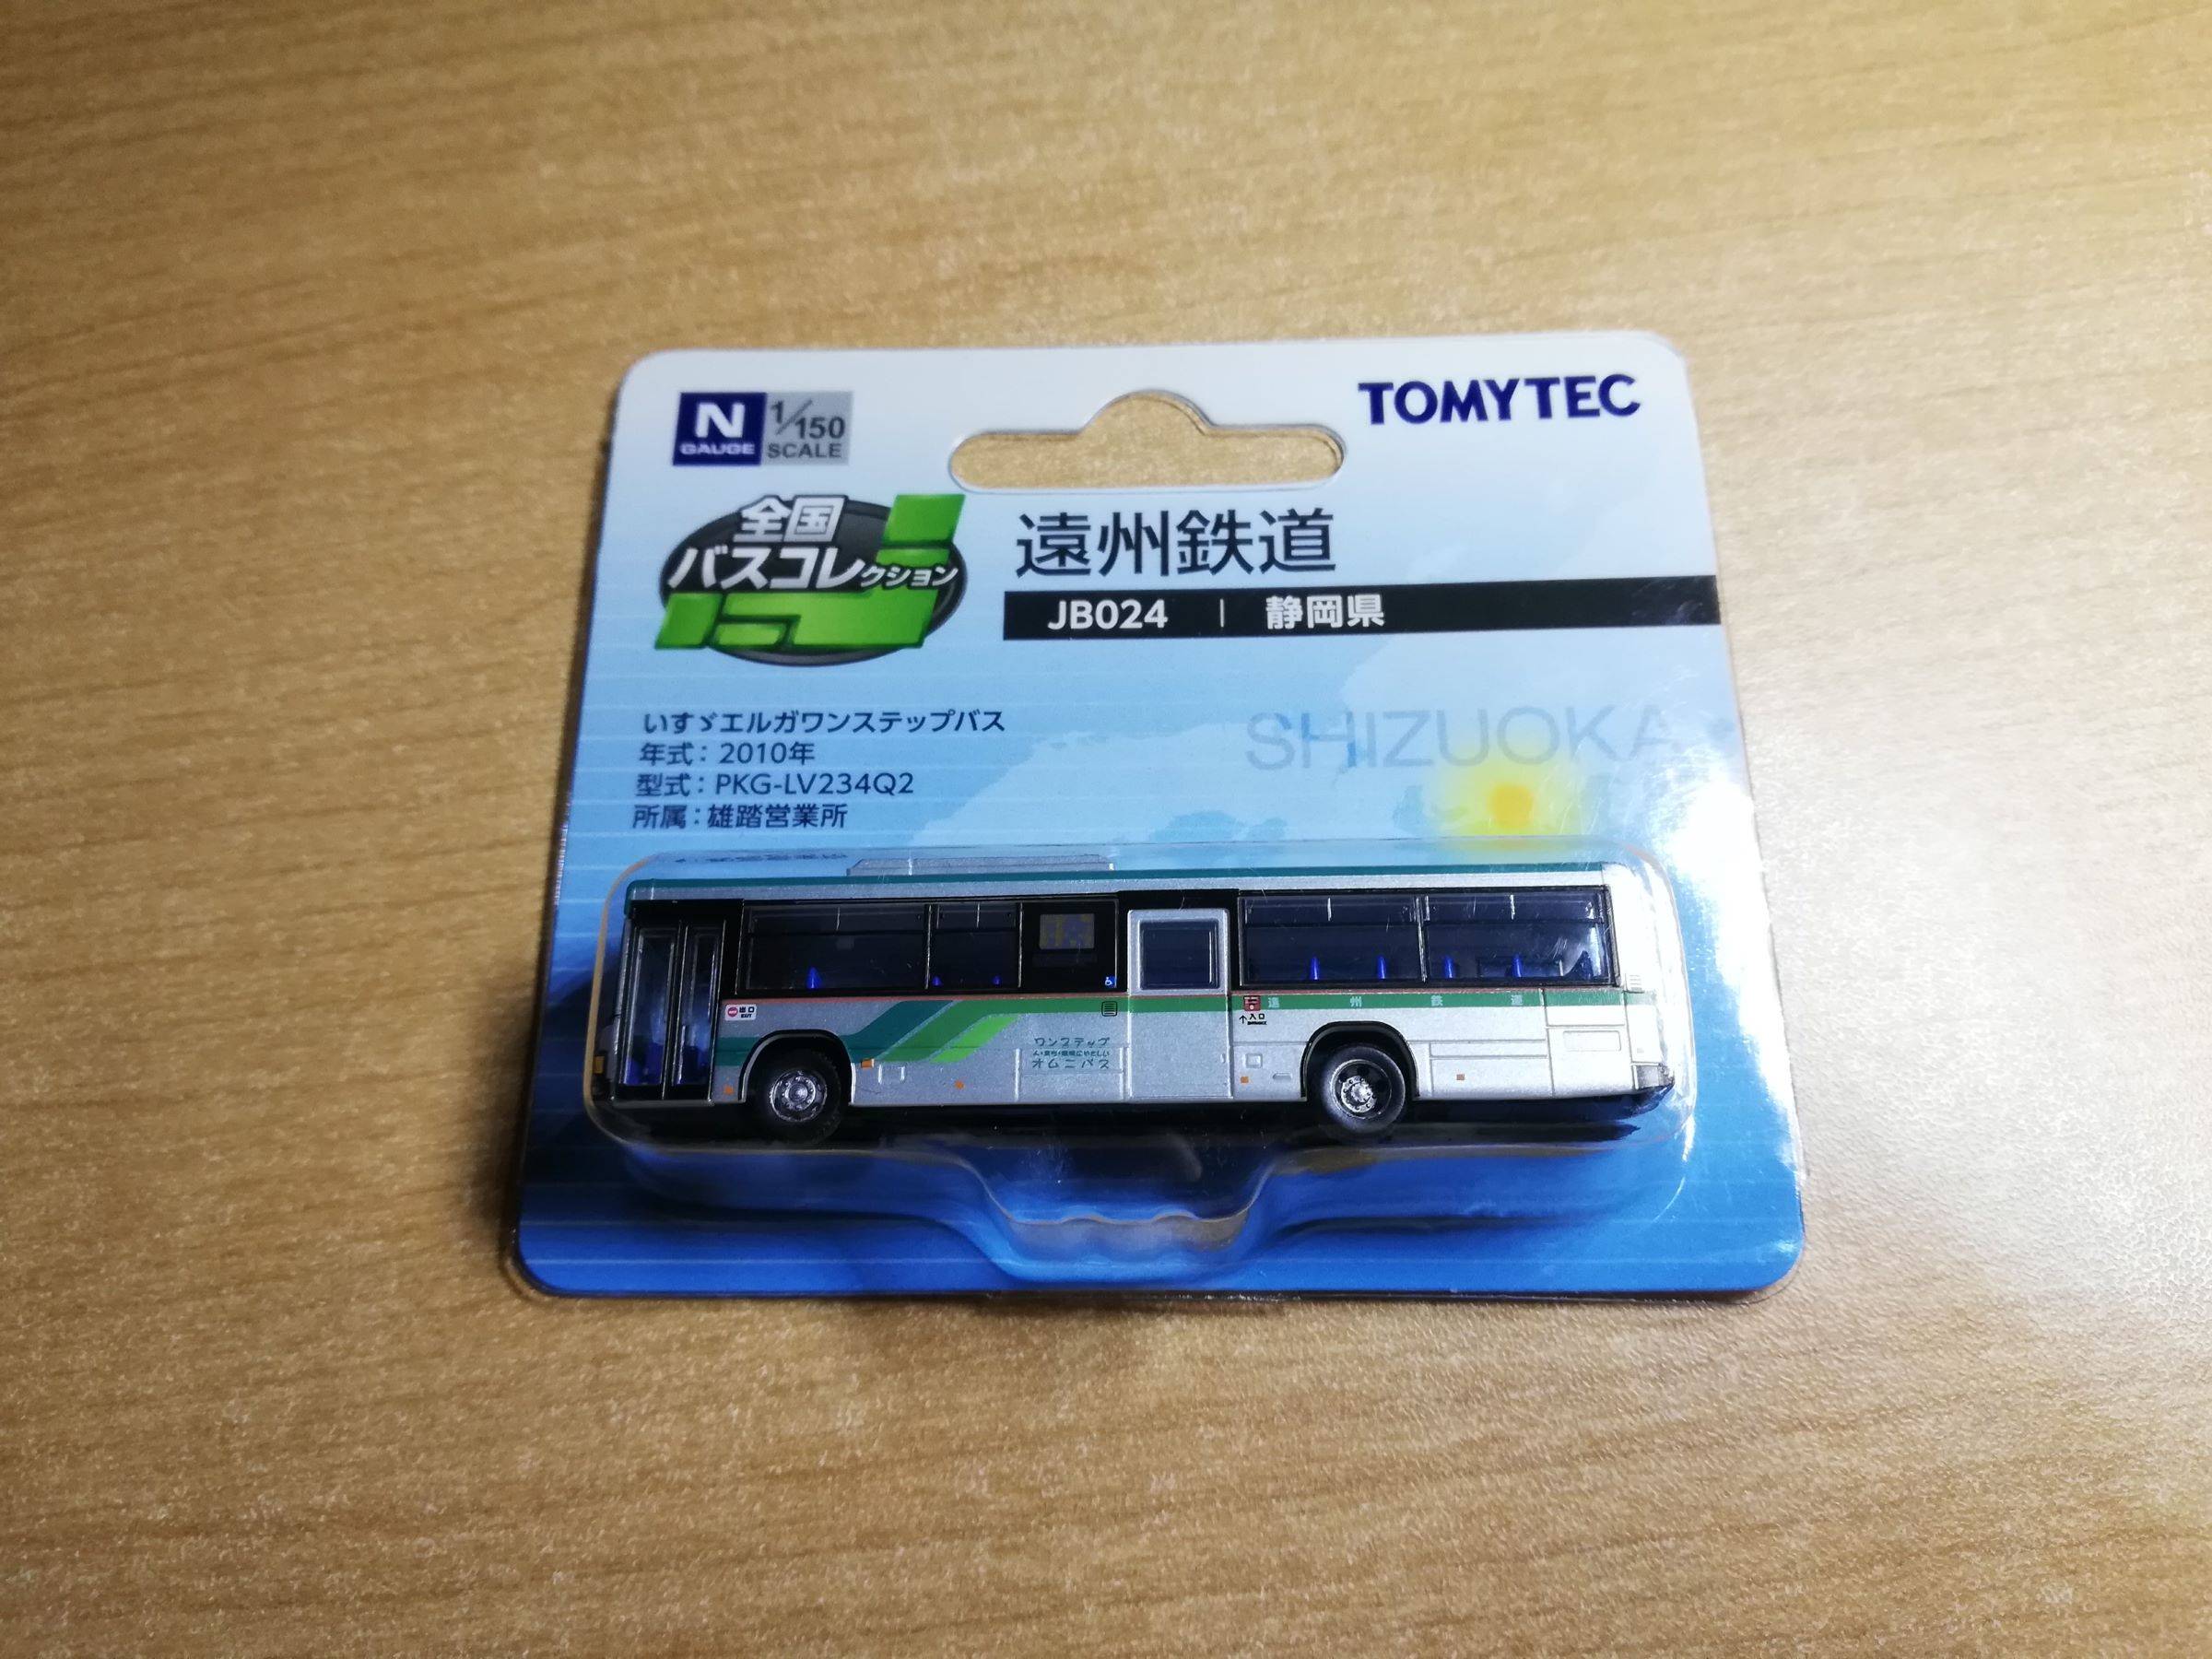 Tomytec Bus Collection 289289 Keisei 'Licca' Wrapping Bus 1/150 N scale Purple 